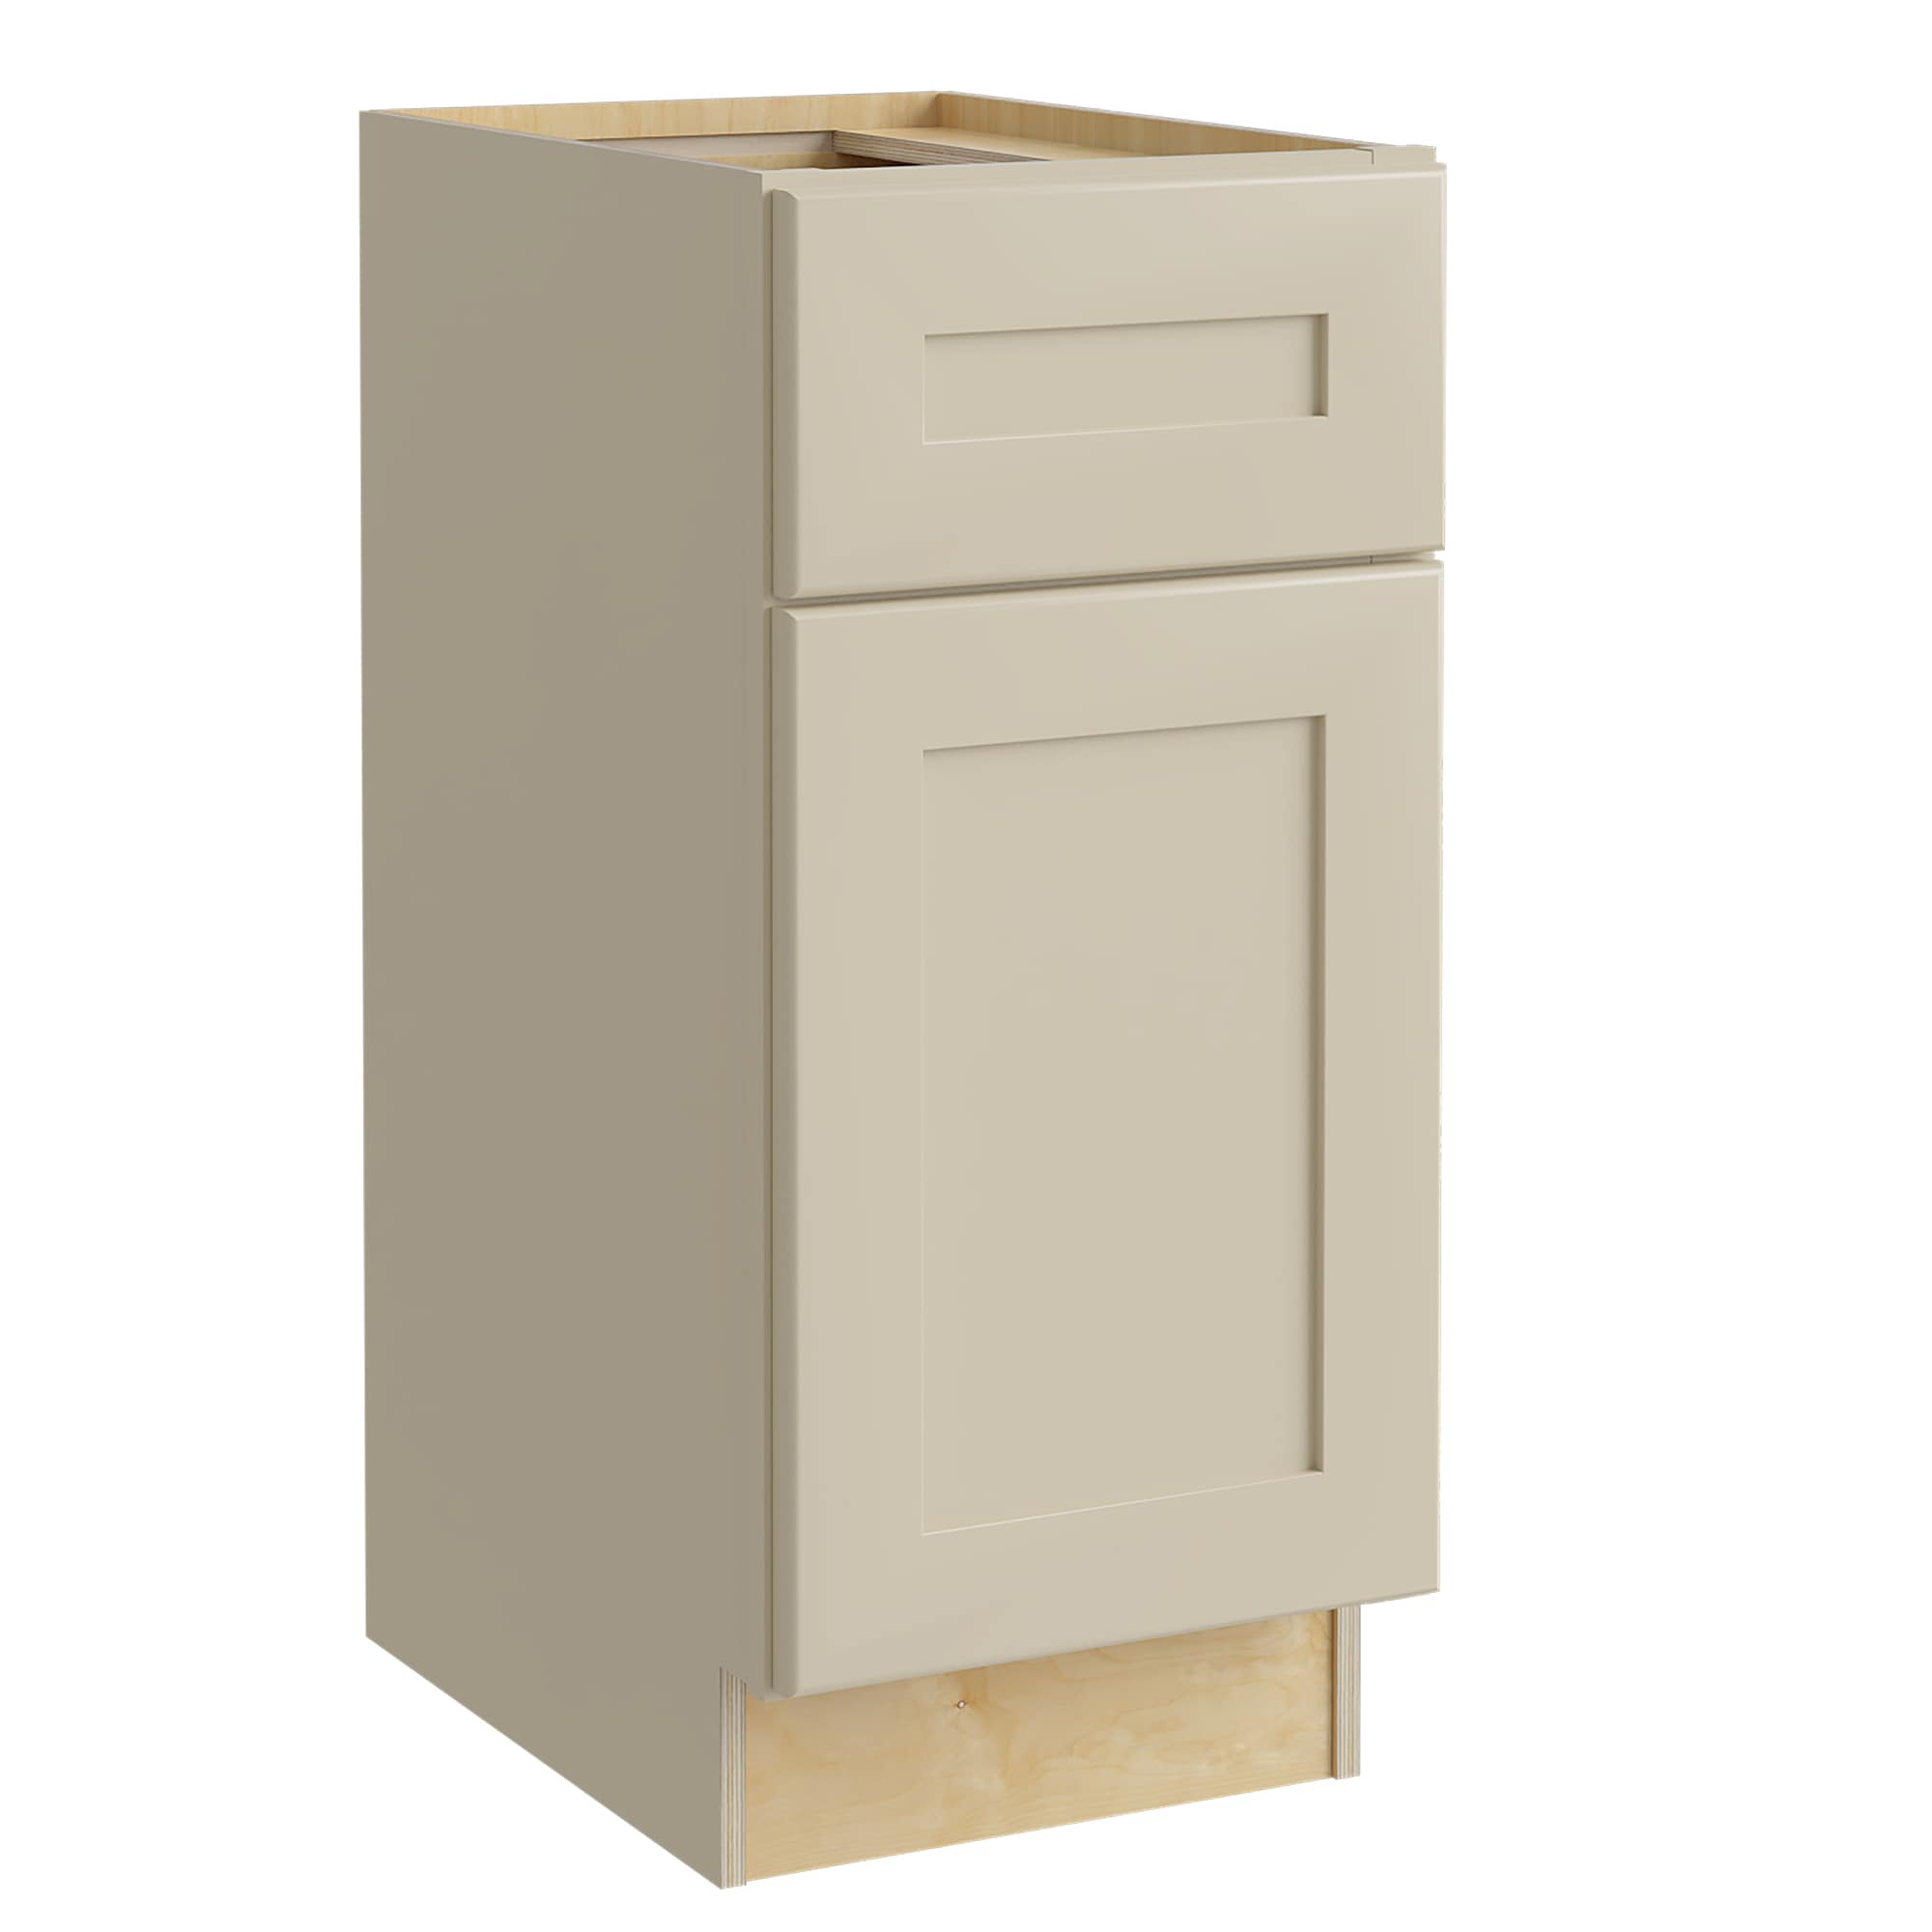 Luxxe Cabinetry 21-in W x 34.5-in H x 21-in D Norfolk Blended Cream Painted Sink Base Fully Assembled Semi-custom Cabinet in Off-White | VSB2121L-NBC